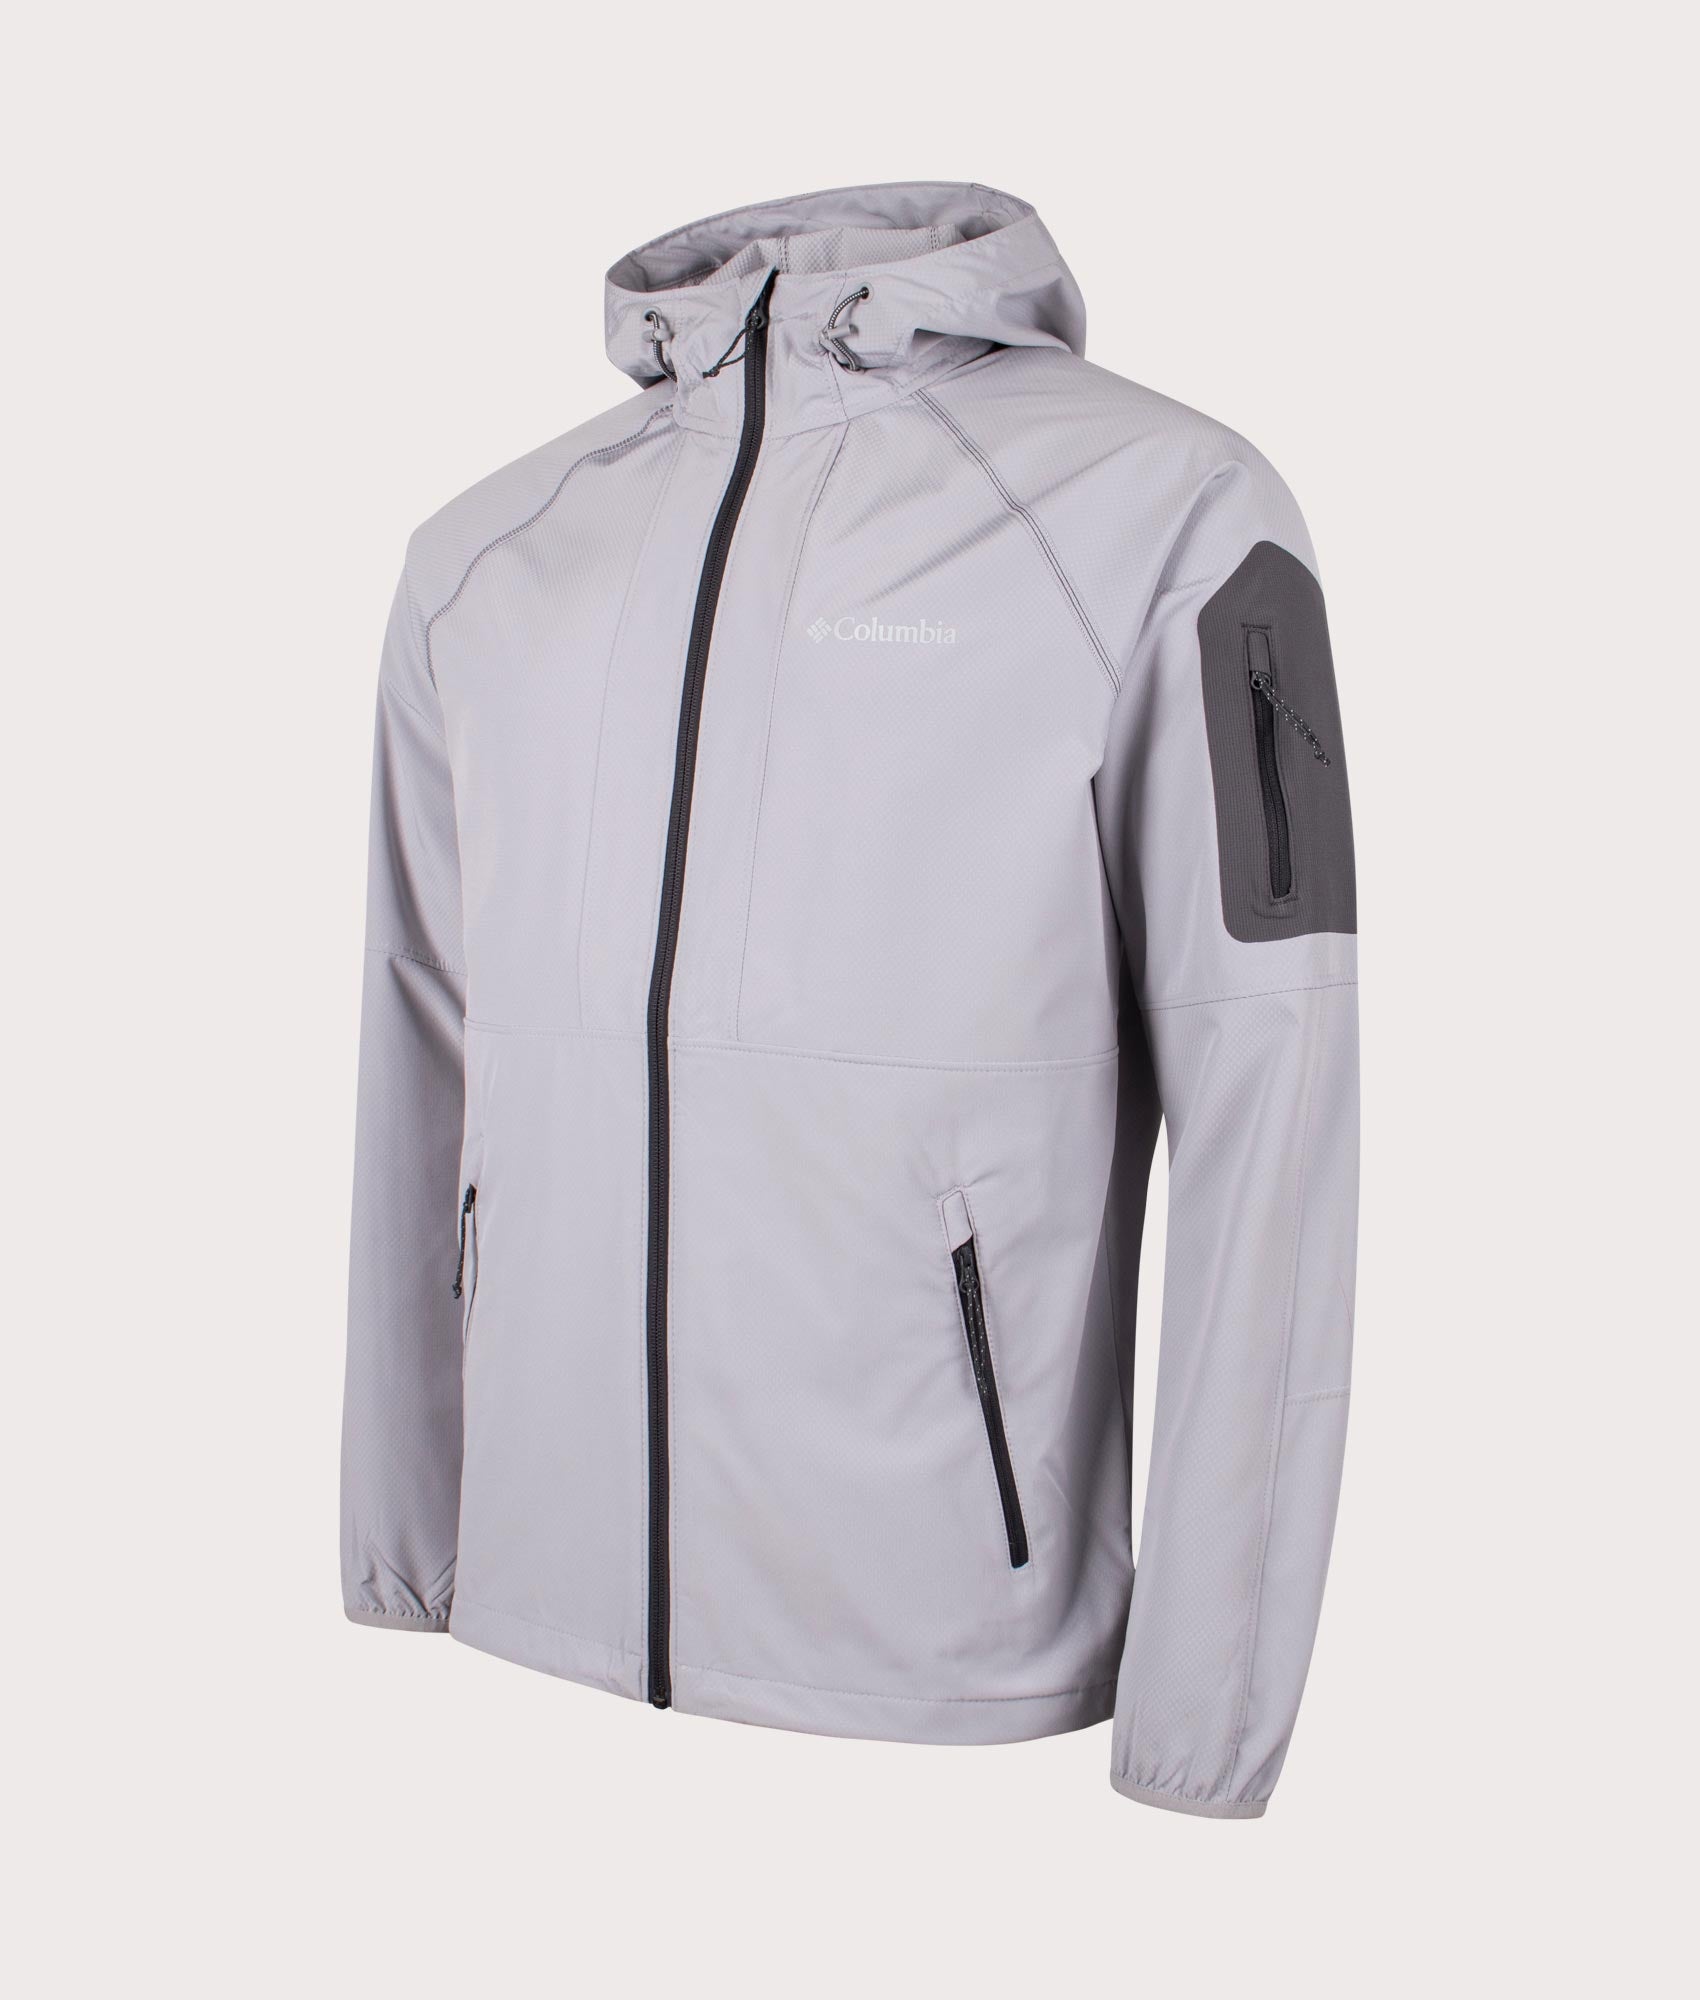 Columbia Mens Tall Heights Hooded Softshell Jacket - Colour: 039 Columbia Grey - Size: Medium